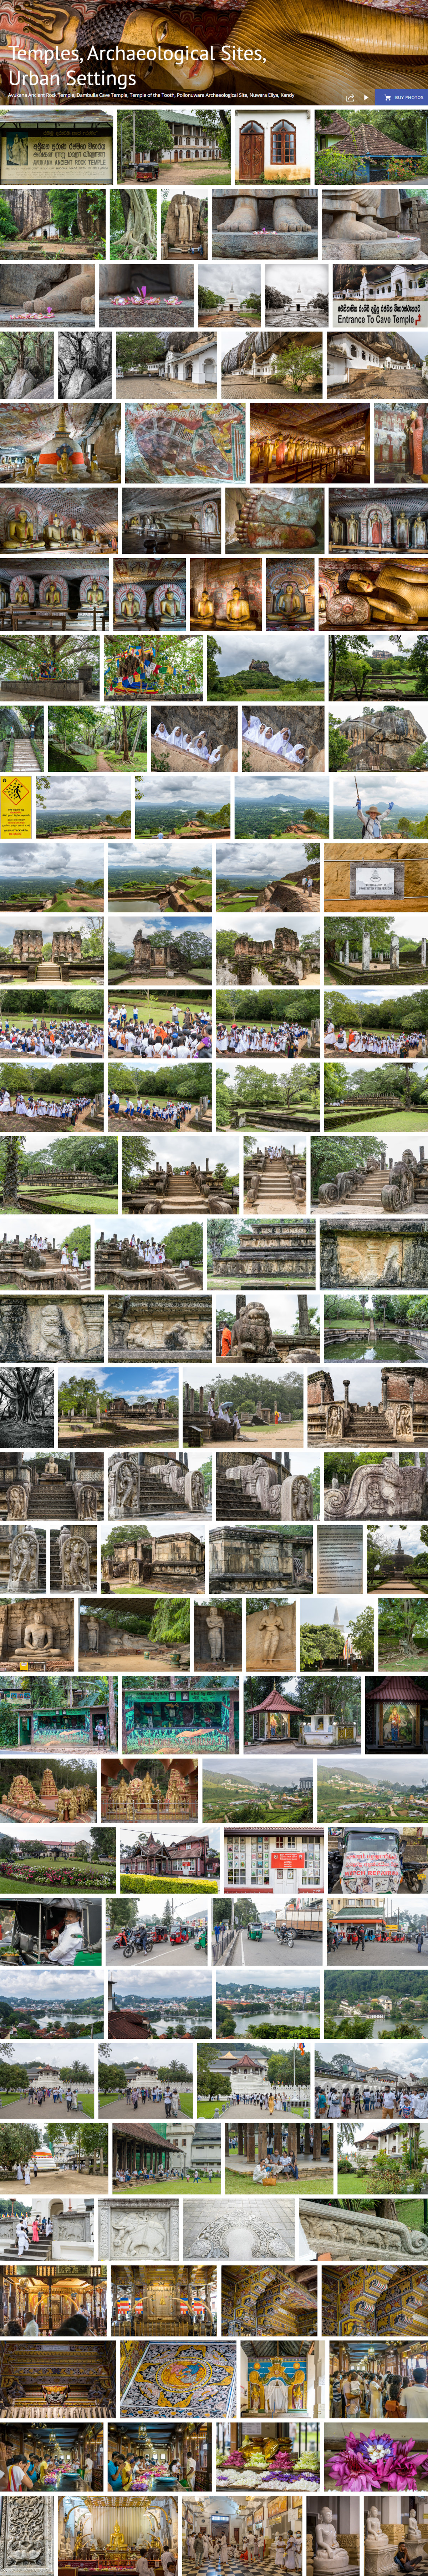 Temples Archaeological Sites Urban Settings